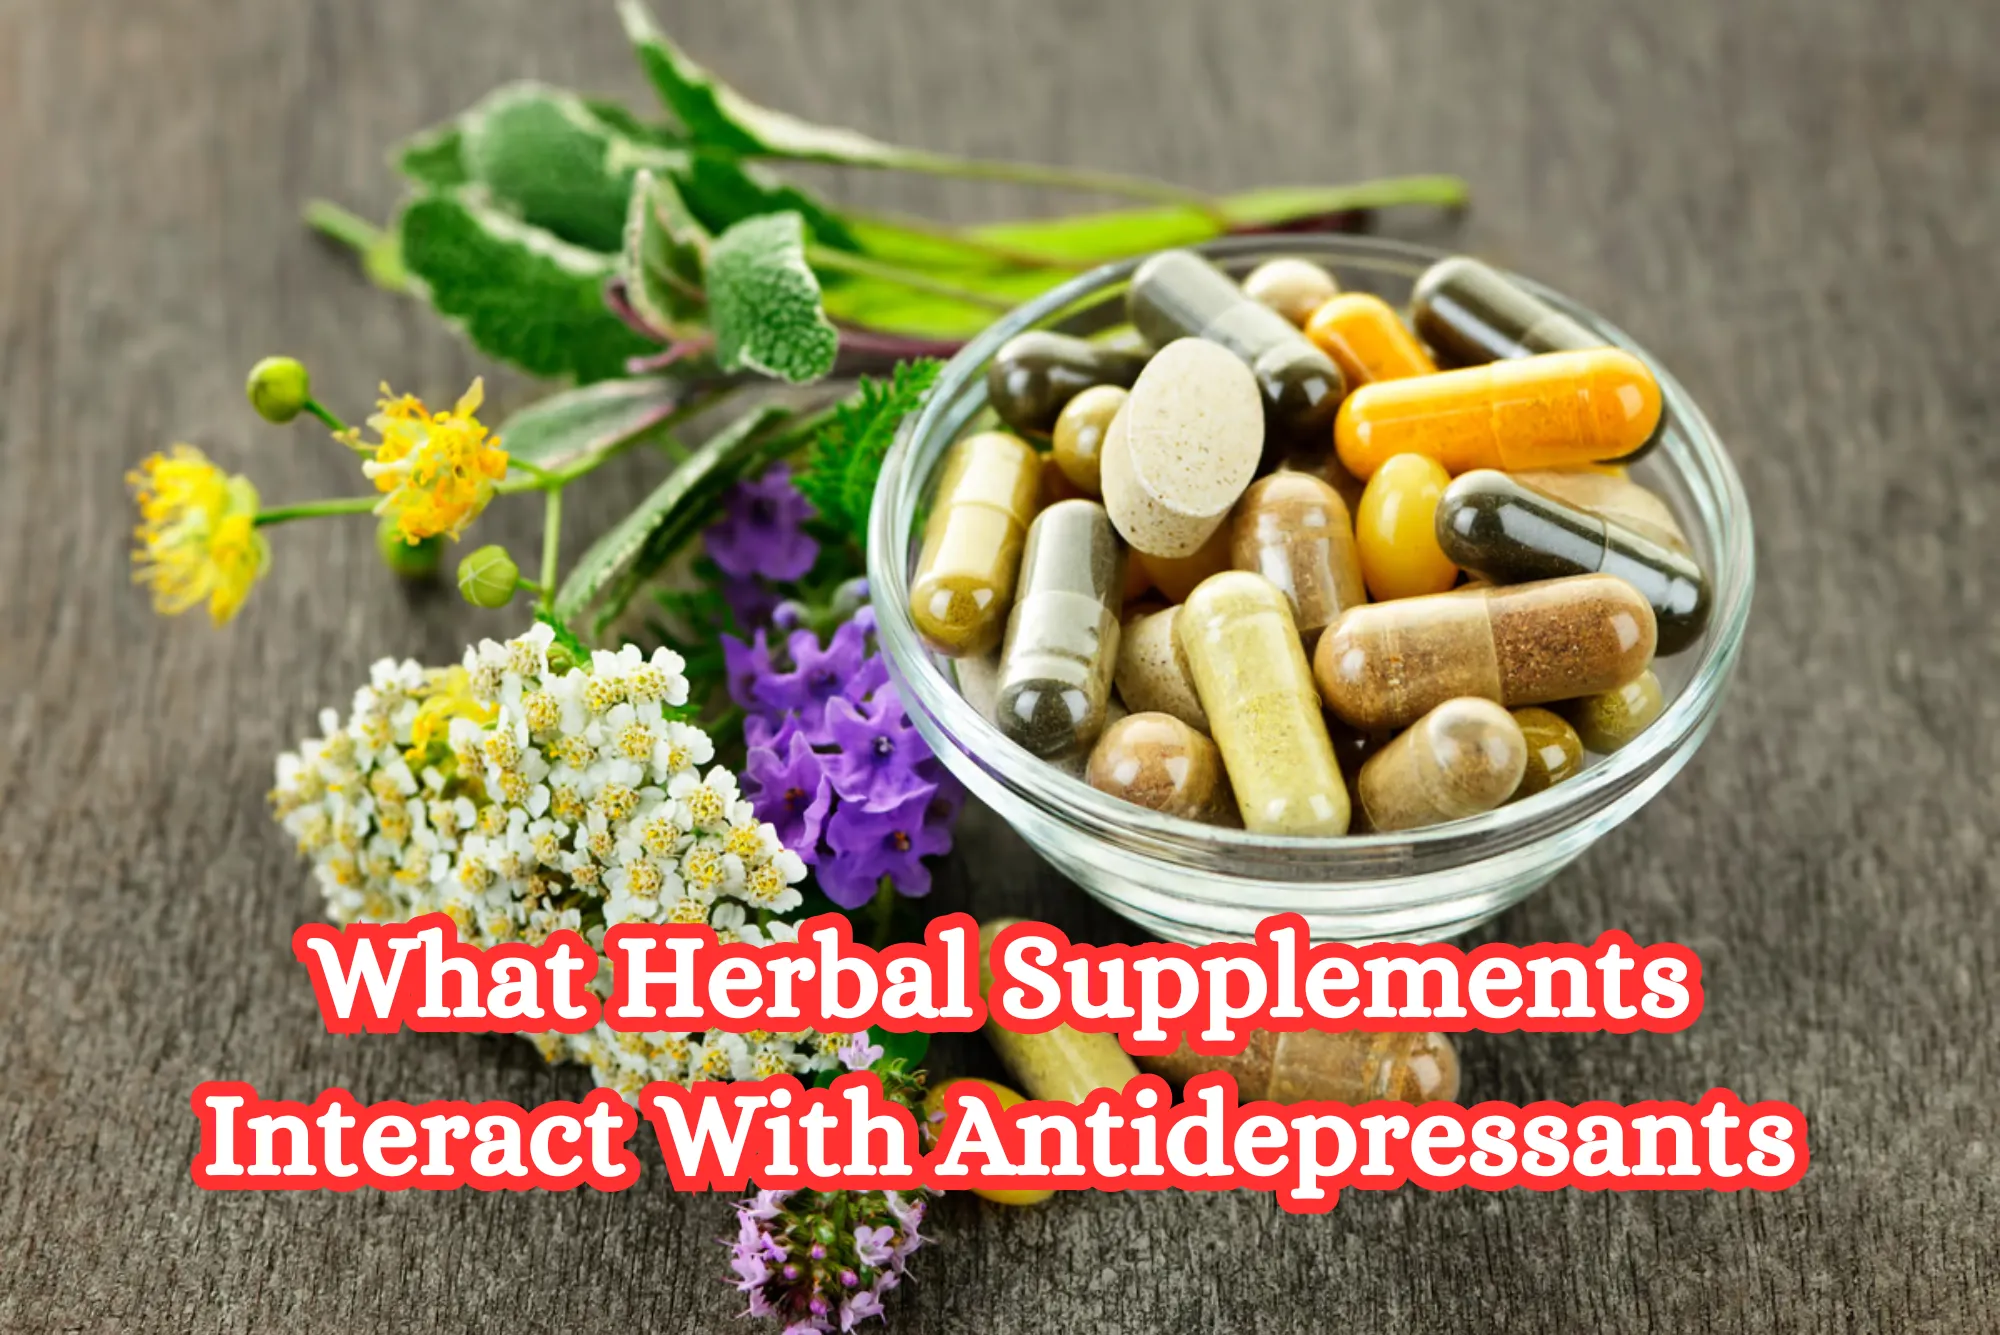 What Herbal Supplements Interact With Antidepressants